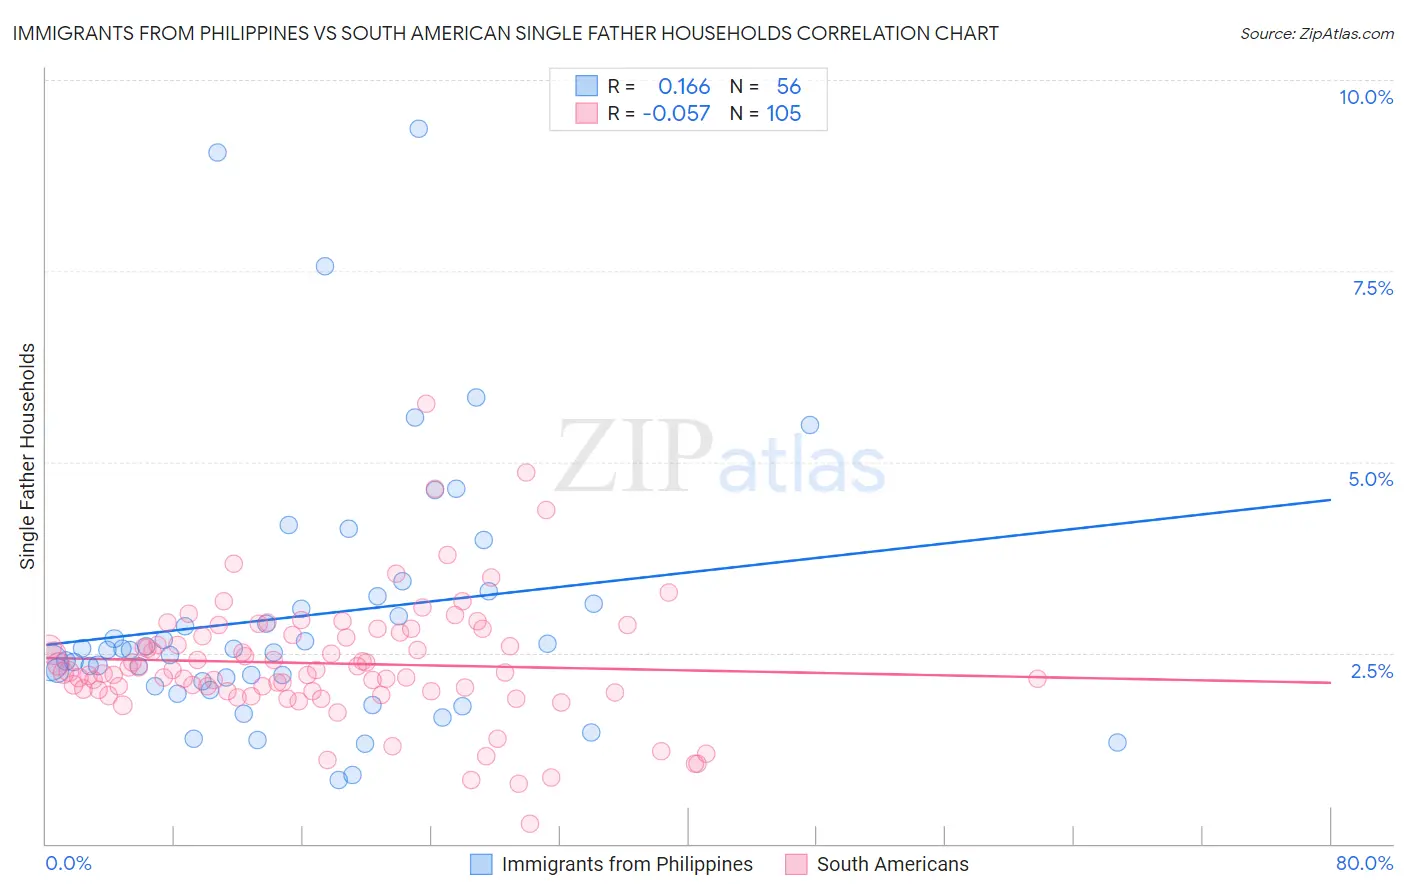 Immigrants from Philippines vs South American Single Father Households